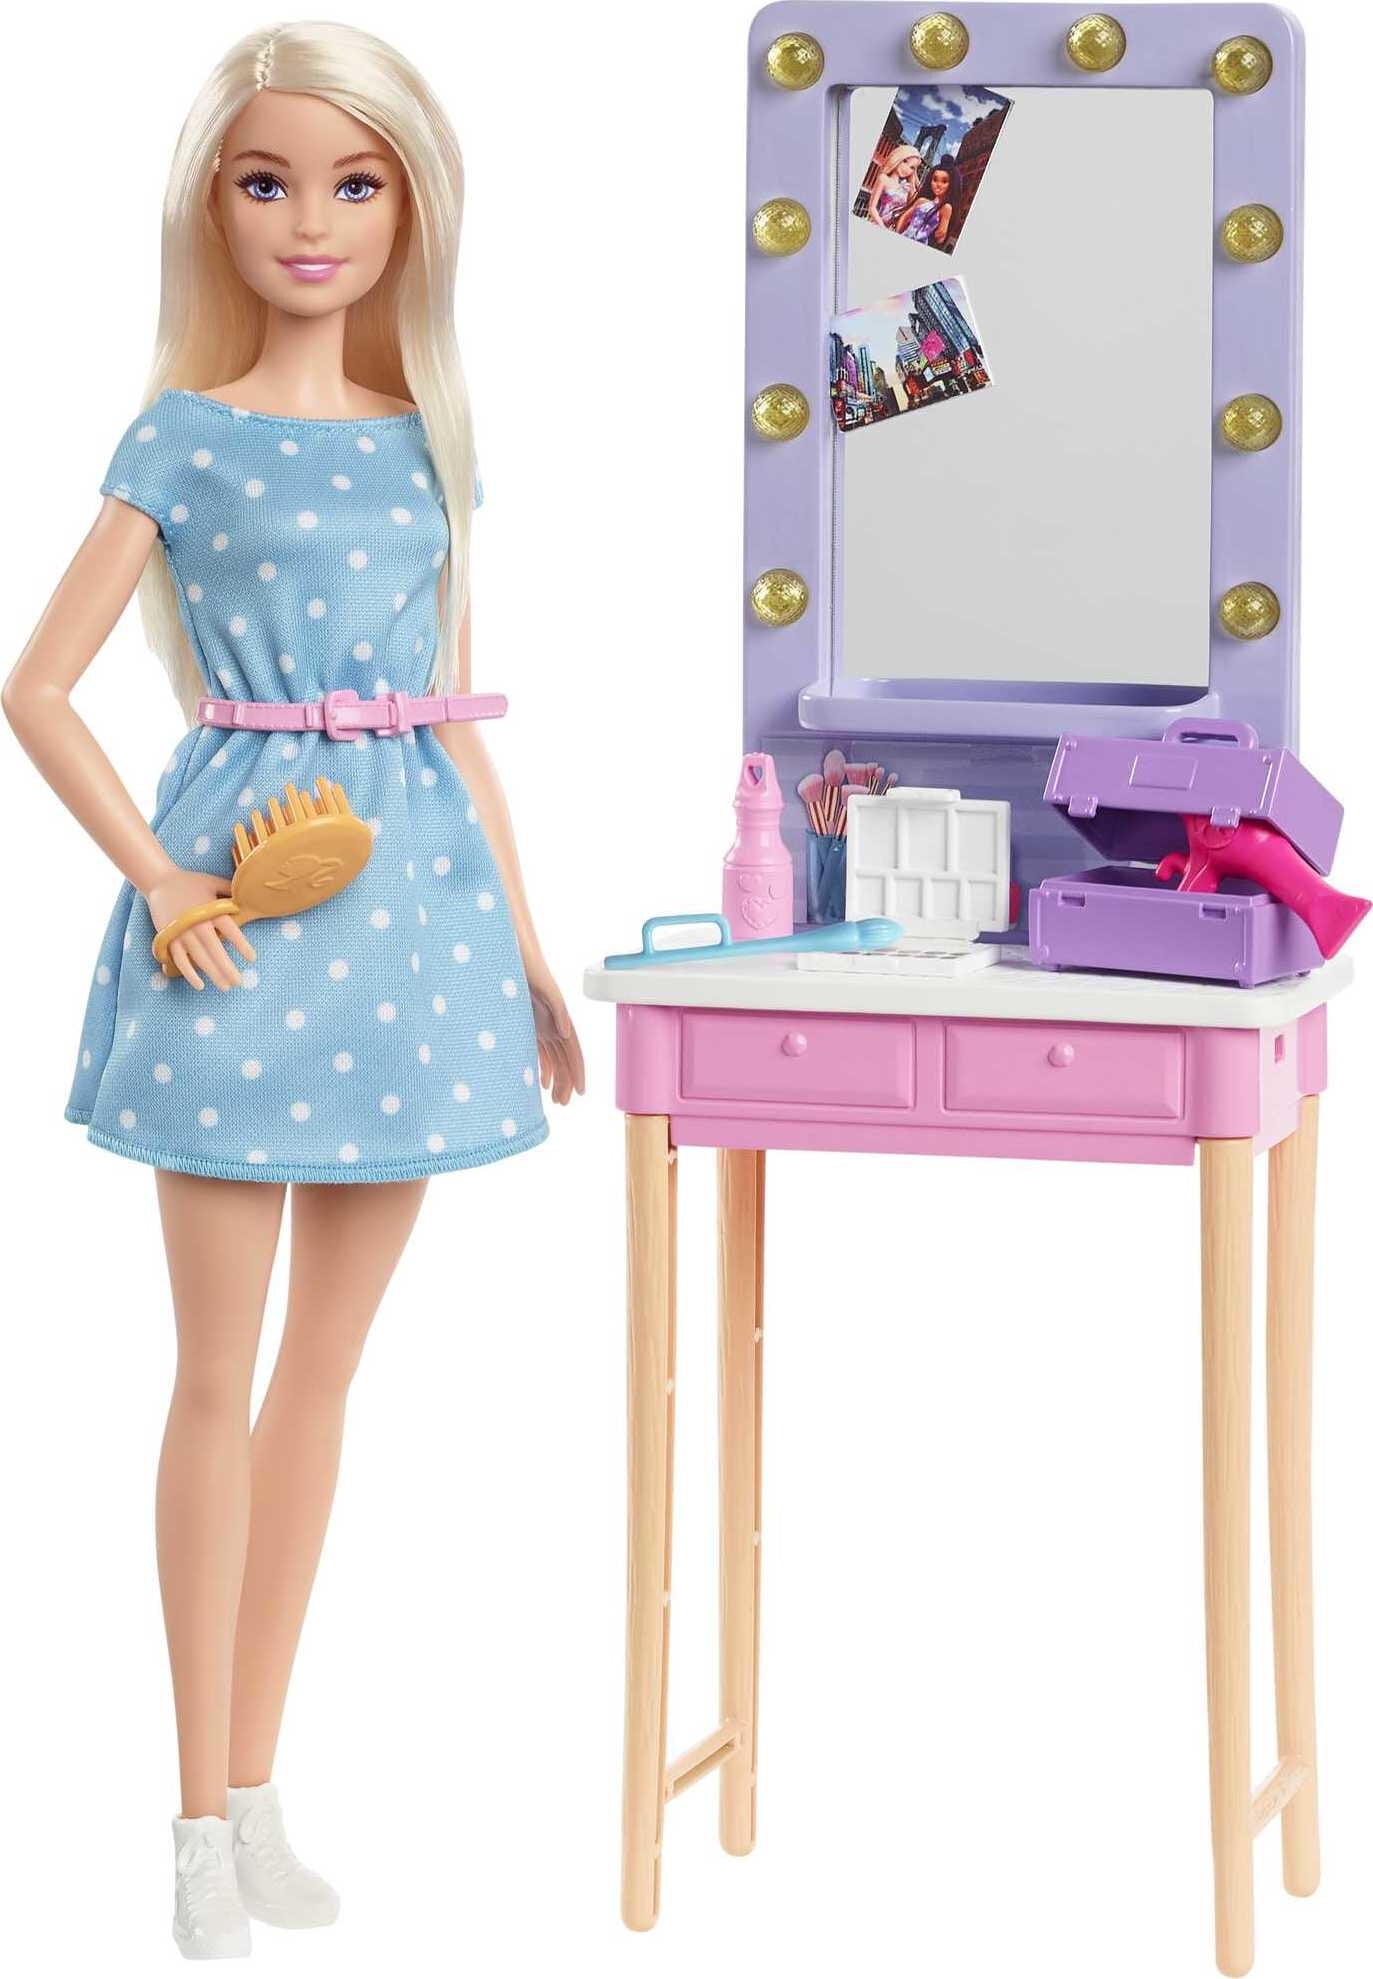 Barbie Toilet Paper DollBedroom DecorationLight Blue Dress 12 Inches tall